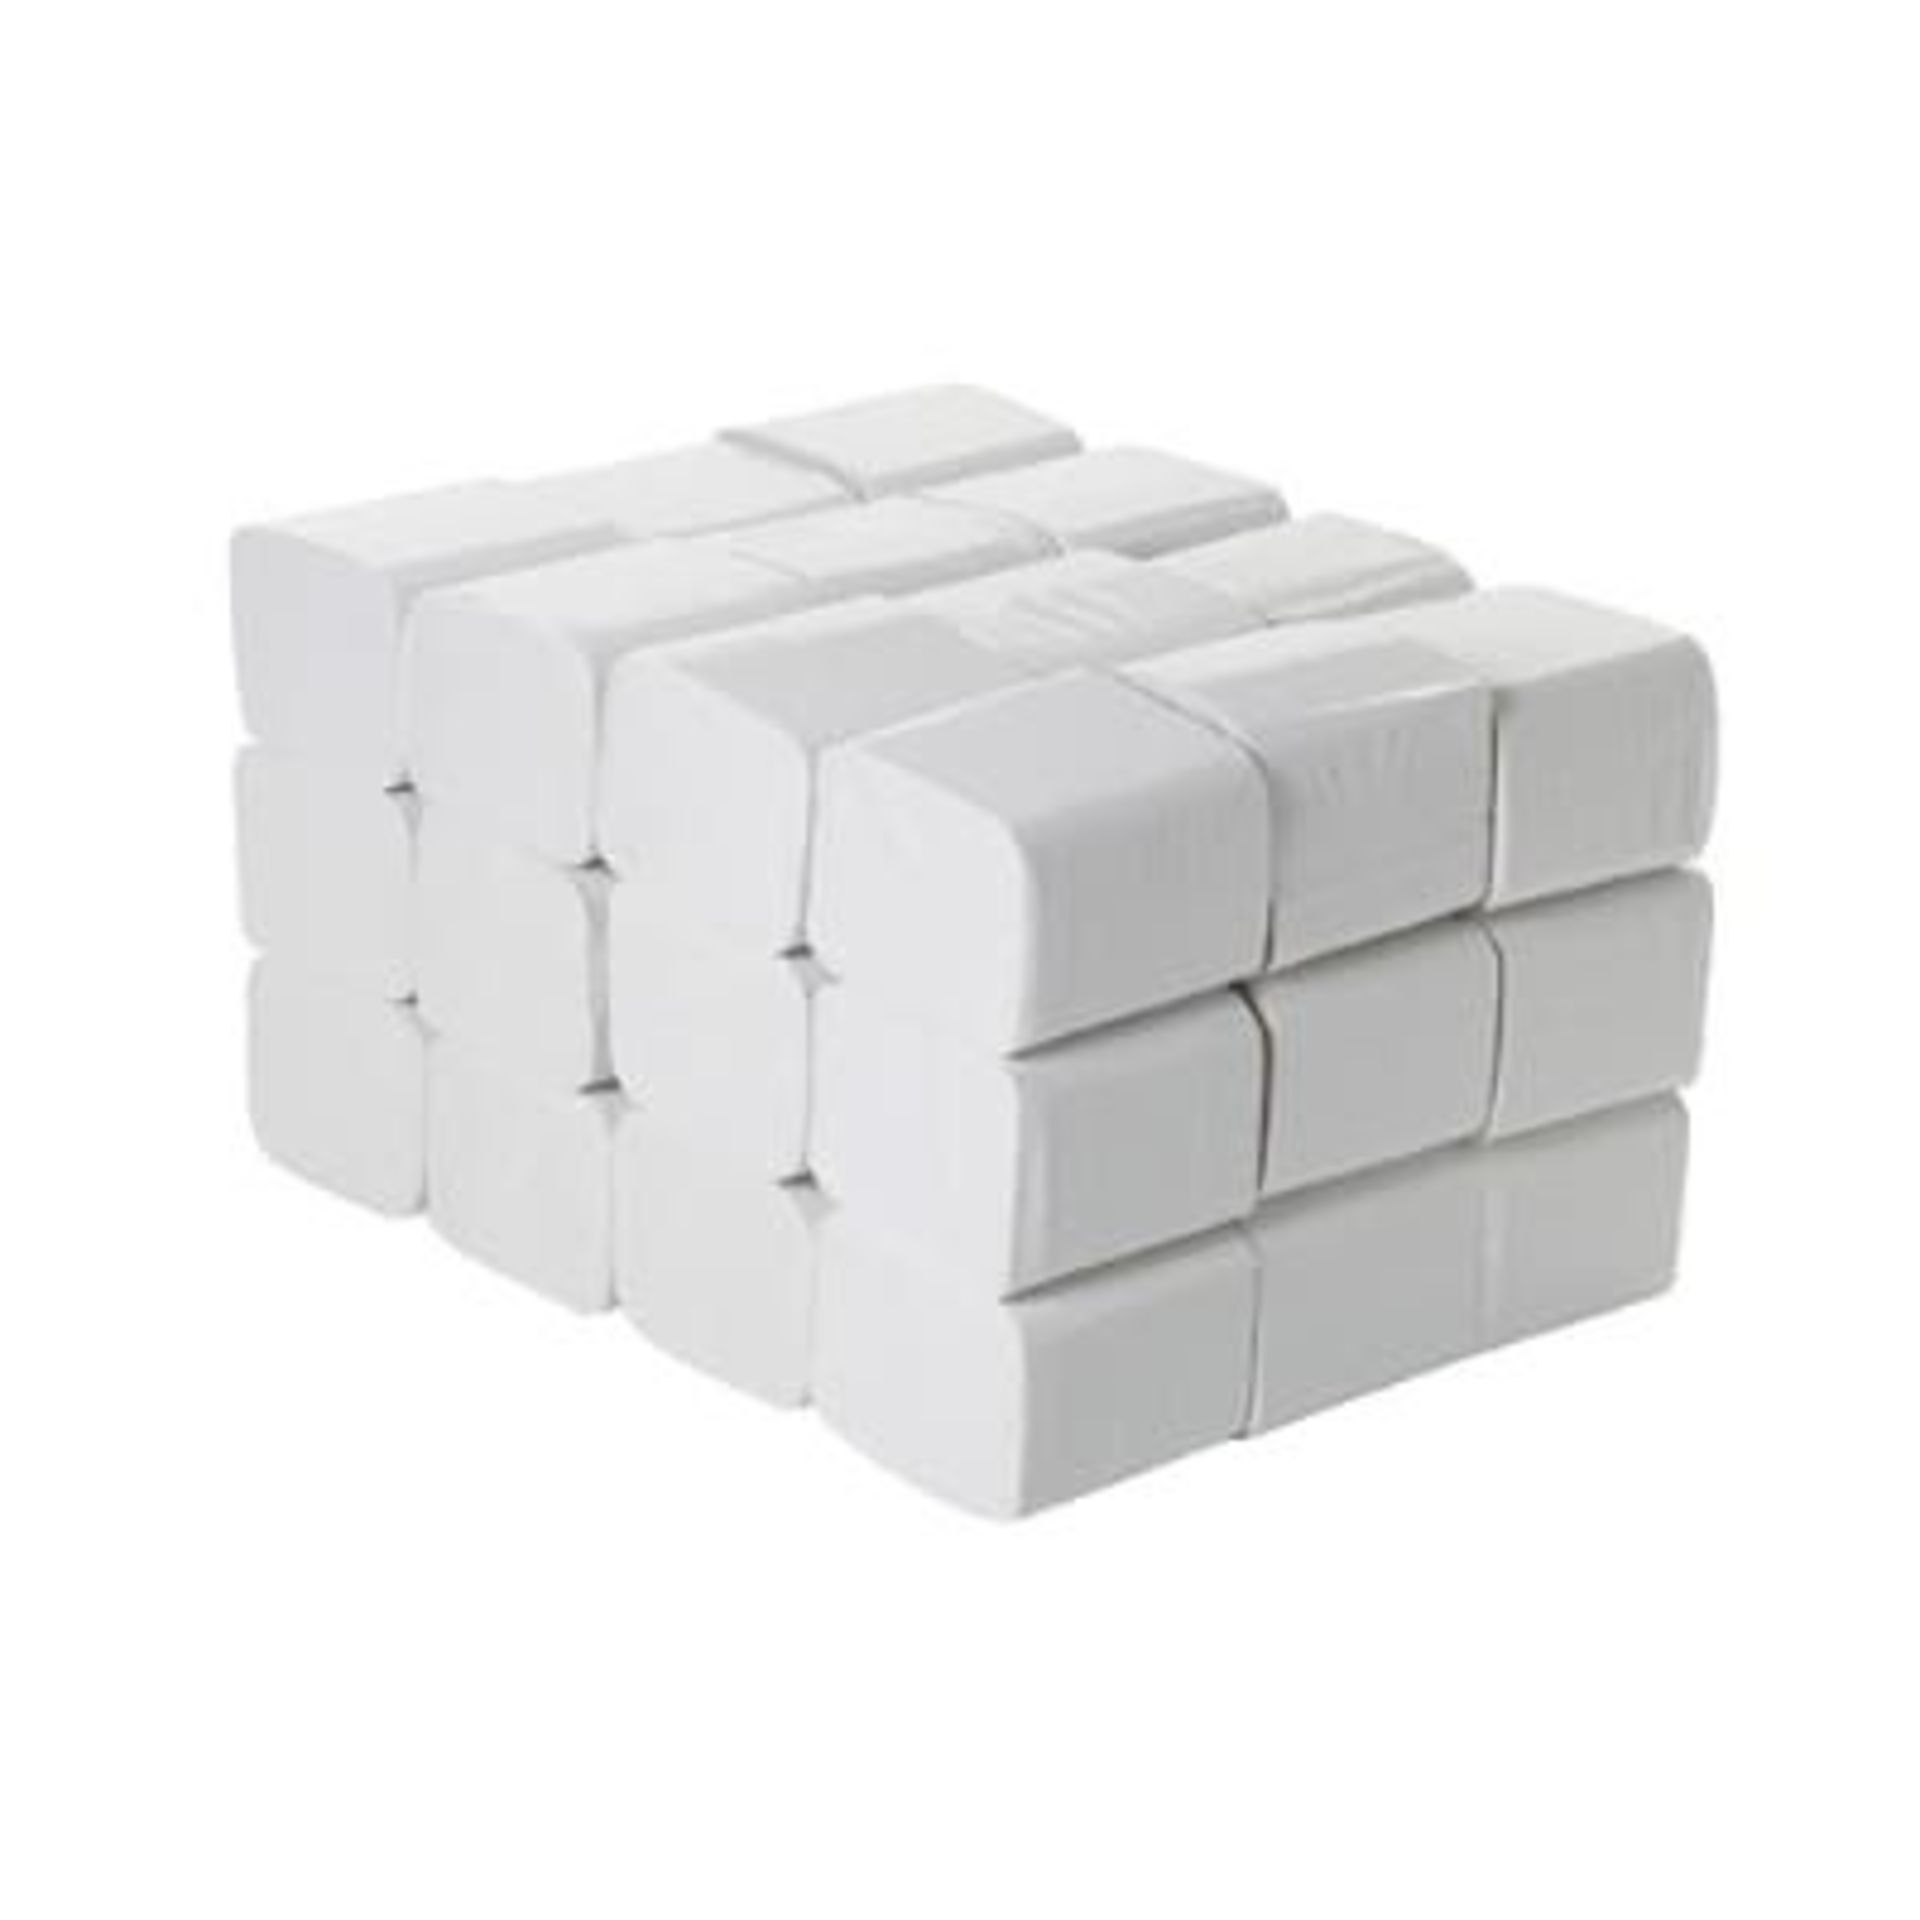 PALLET TO CONTAIN 80 x New Boxes Each Containing 36 Packs of Bulk Pack Toilet Tissue 2 Ply. (2,880